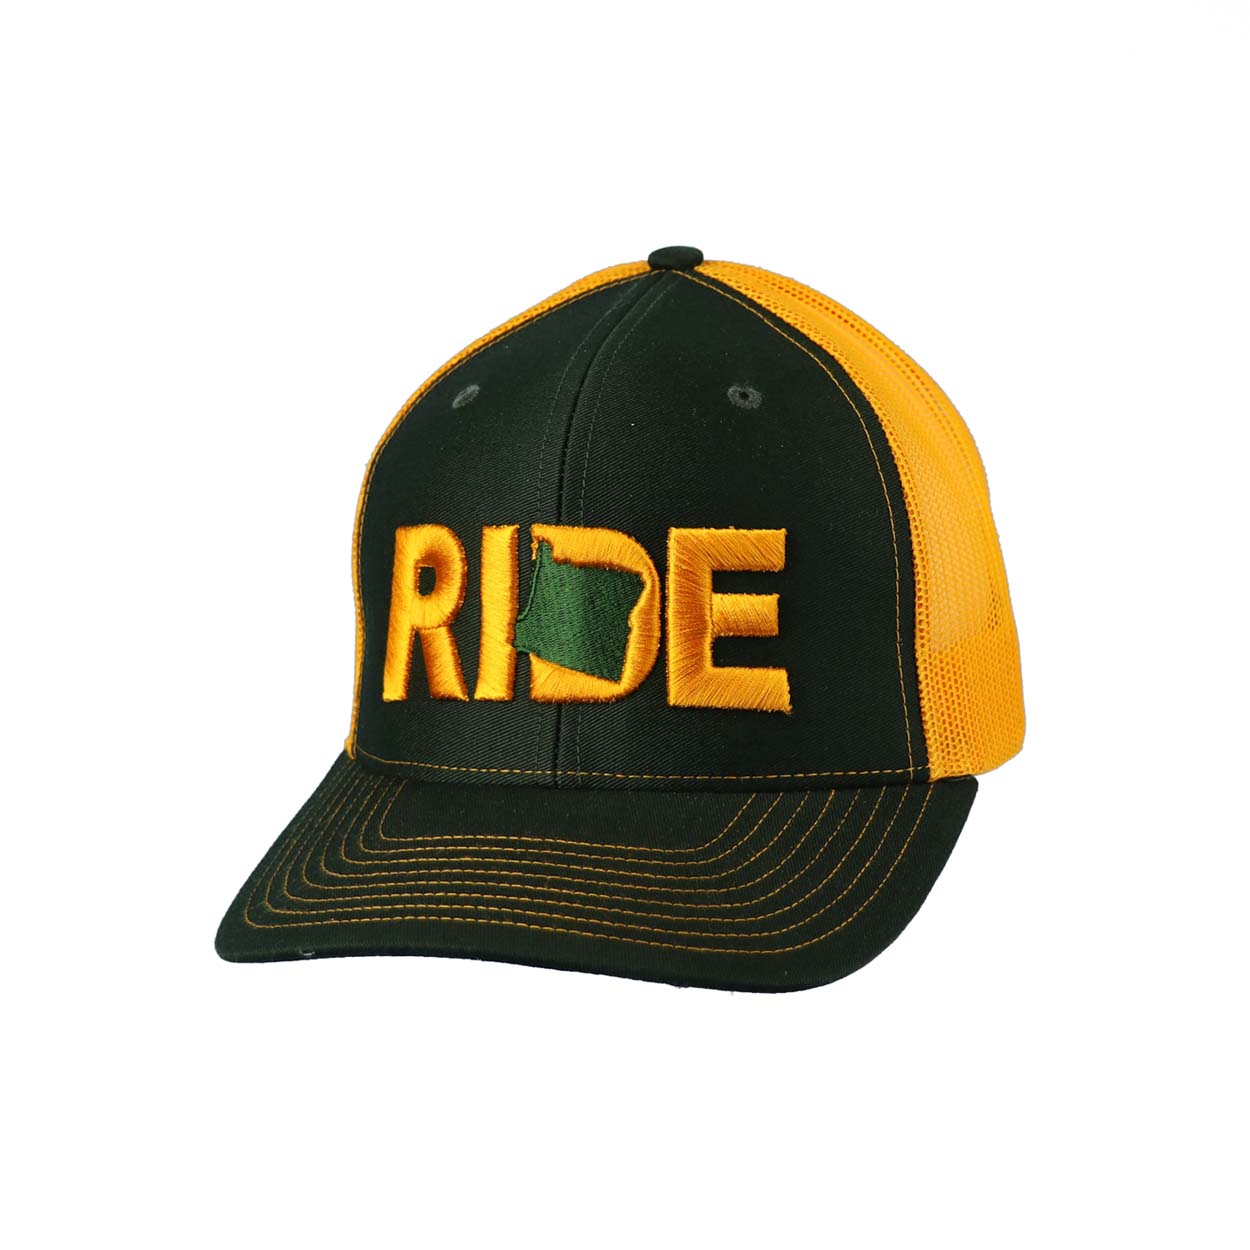 Ride Oregon Classic Embroidered Snapback Trucker Hat Green/Gold